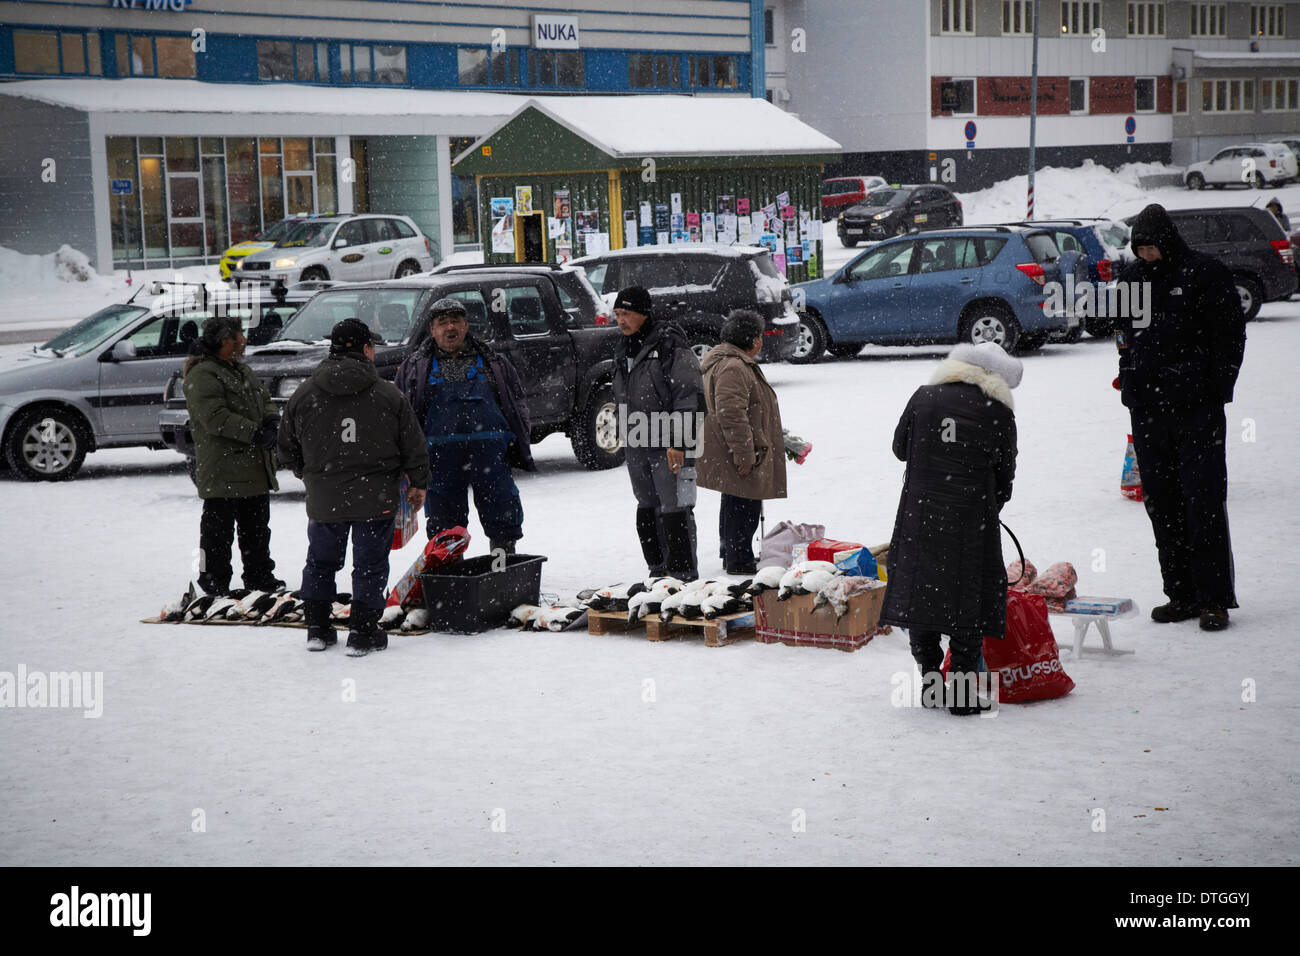 A street market in the city of Nuuk. Greenland An Inuit hunter selling guillemots caught earlier that day Stock Photo